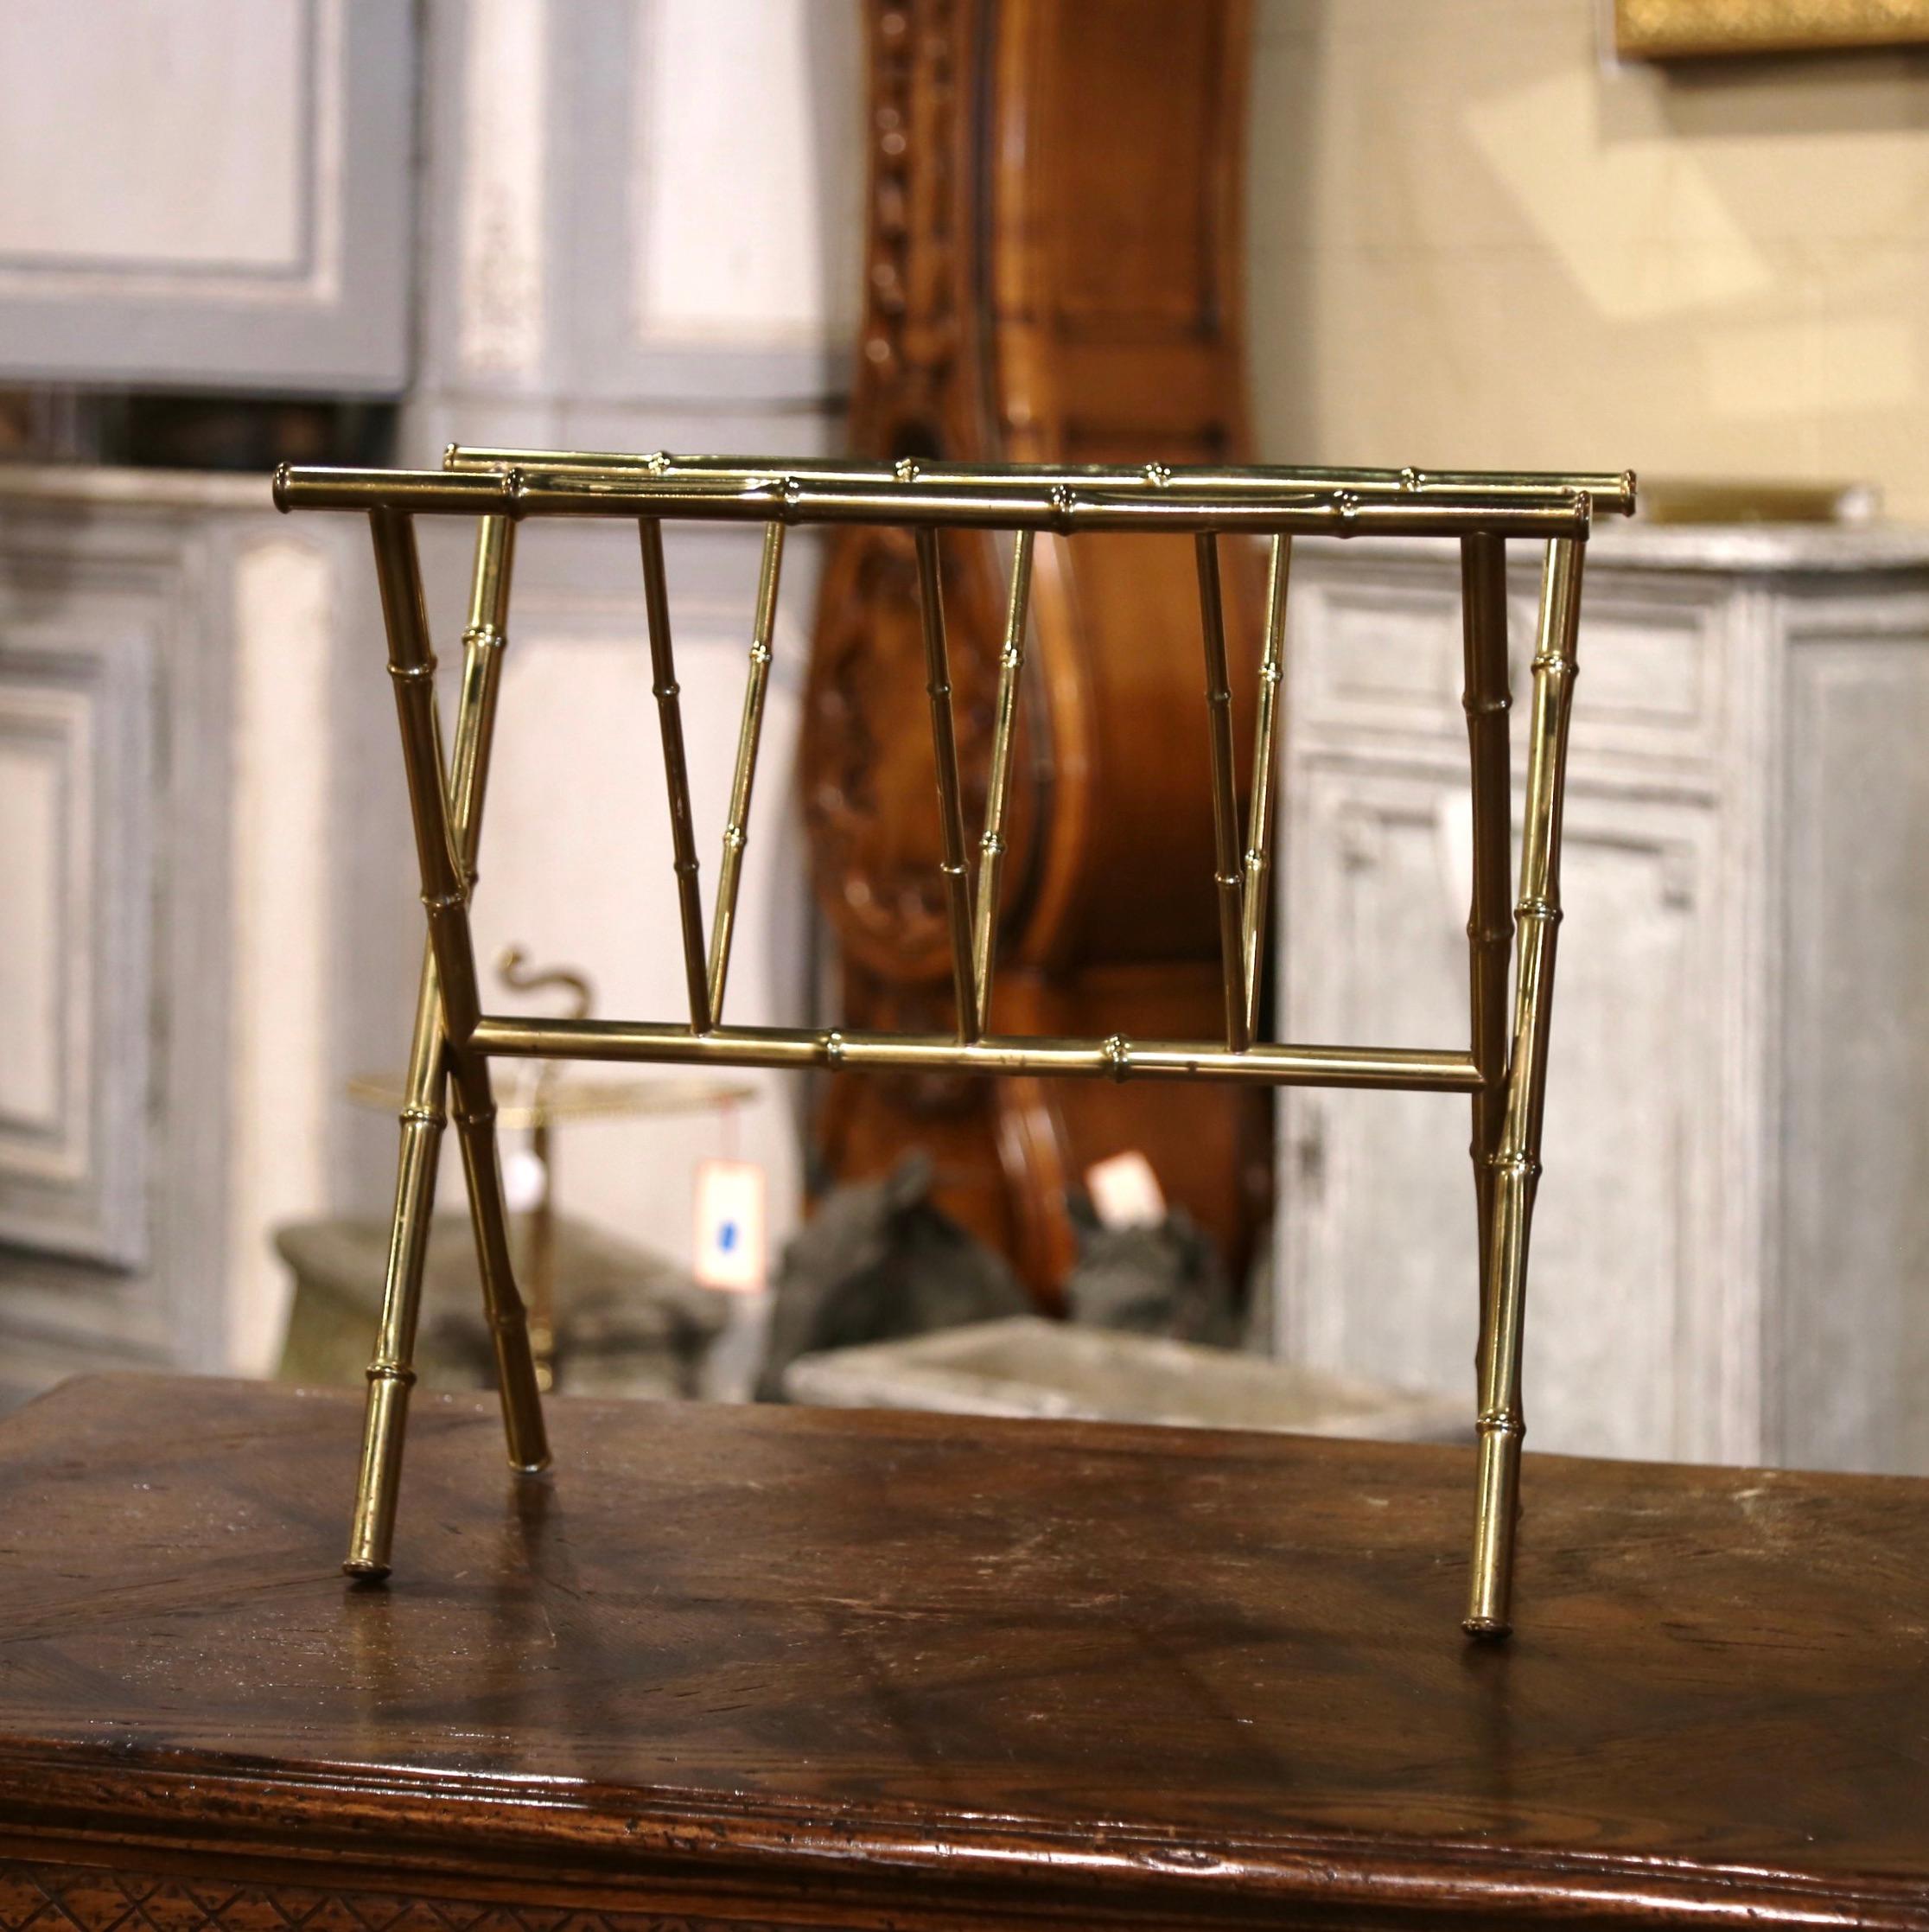 Keep your newspapers organized and neat inside this vintage magazine holder. Crafted in Paris France circa 1950, and attributed to Maison Bagues, the elegant, mid-century brass stand is both useful and stylish. The rack has a popular faux bamboo